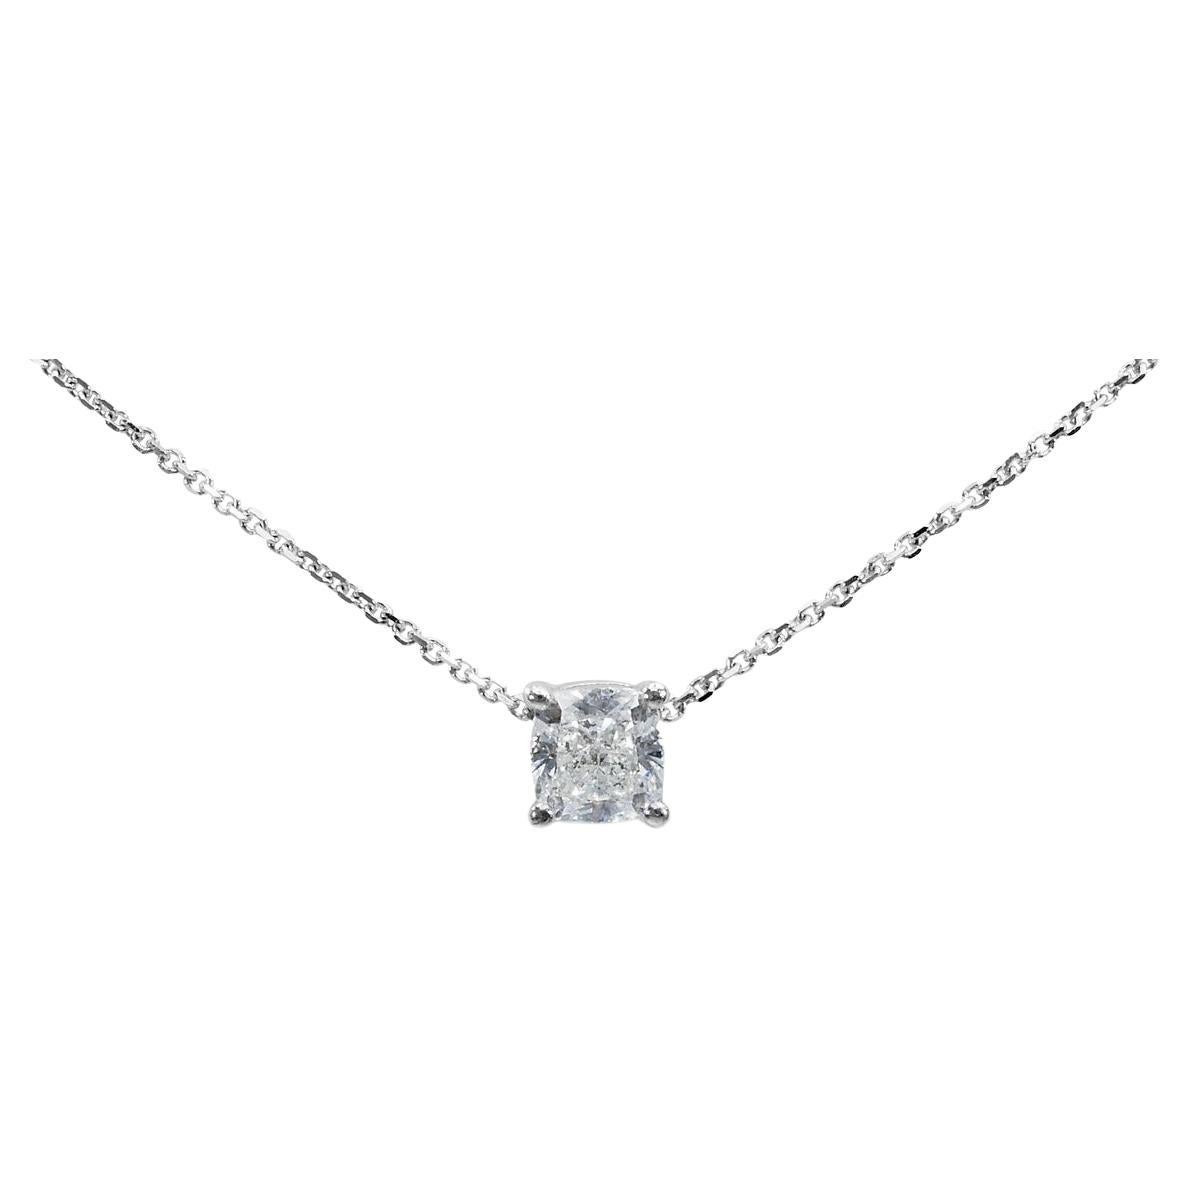 Captivating 18k White Gold Necklace & Pendant w/ 0.9ct Natural Diamond GIA Cert For Sale